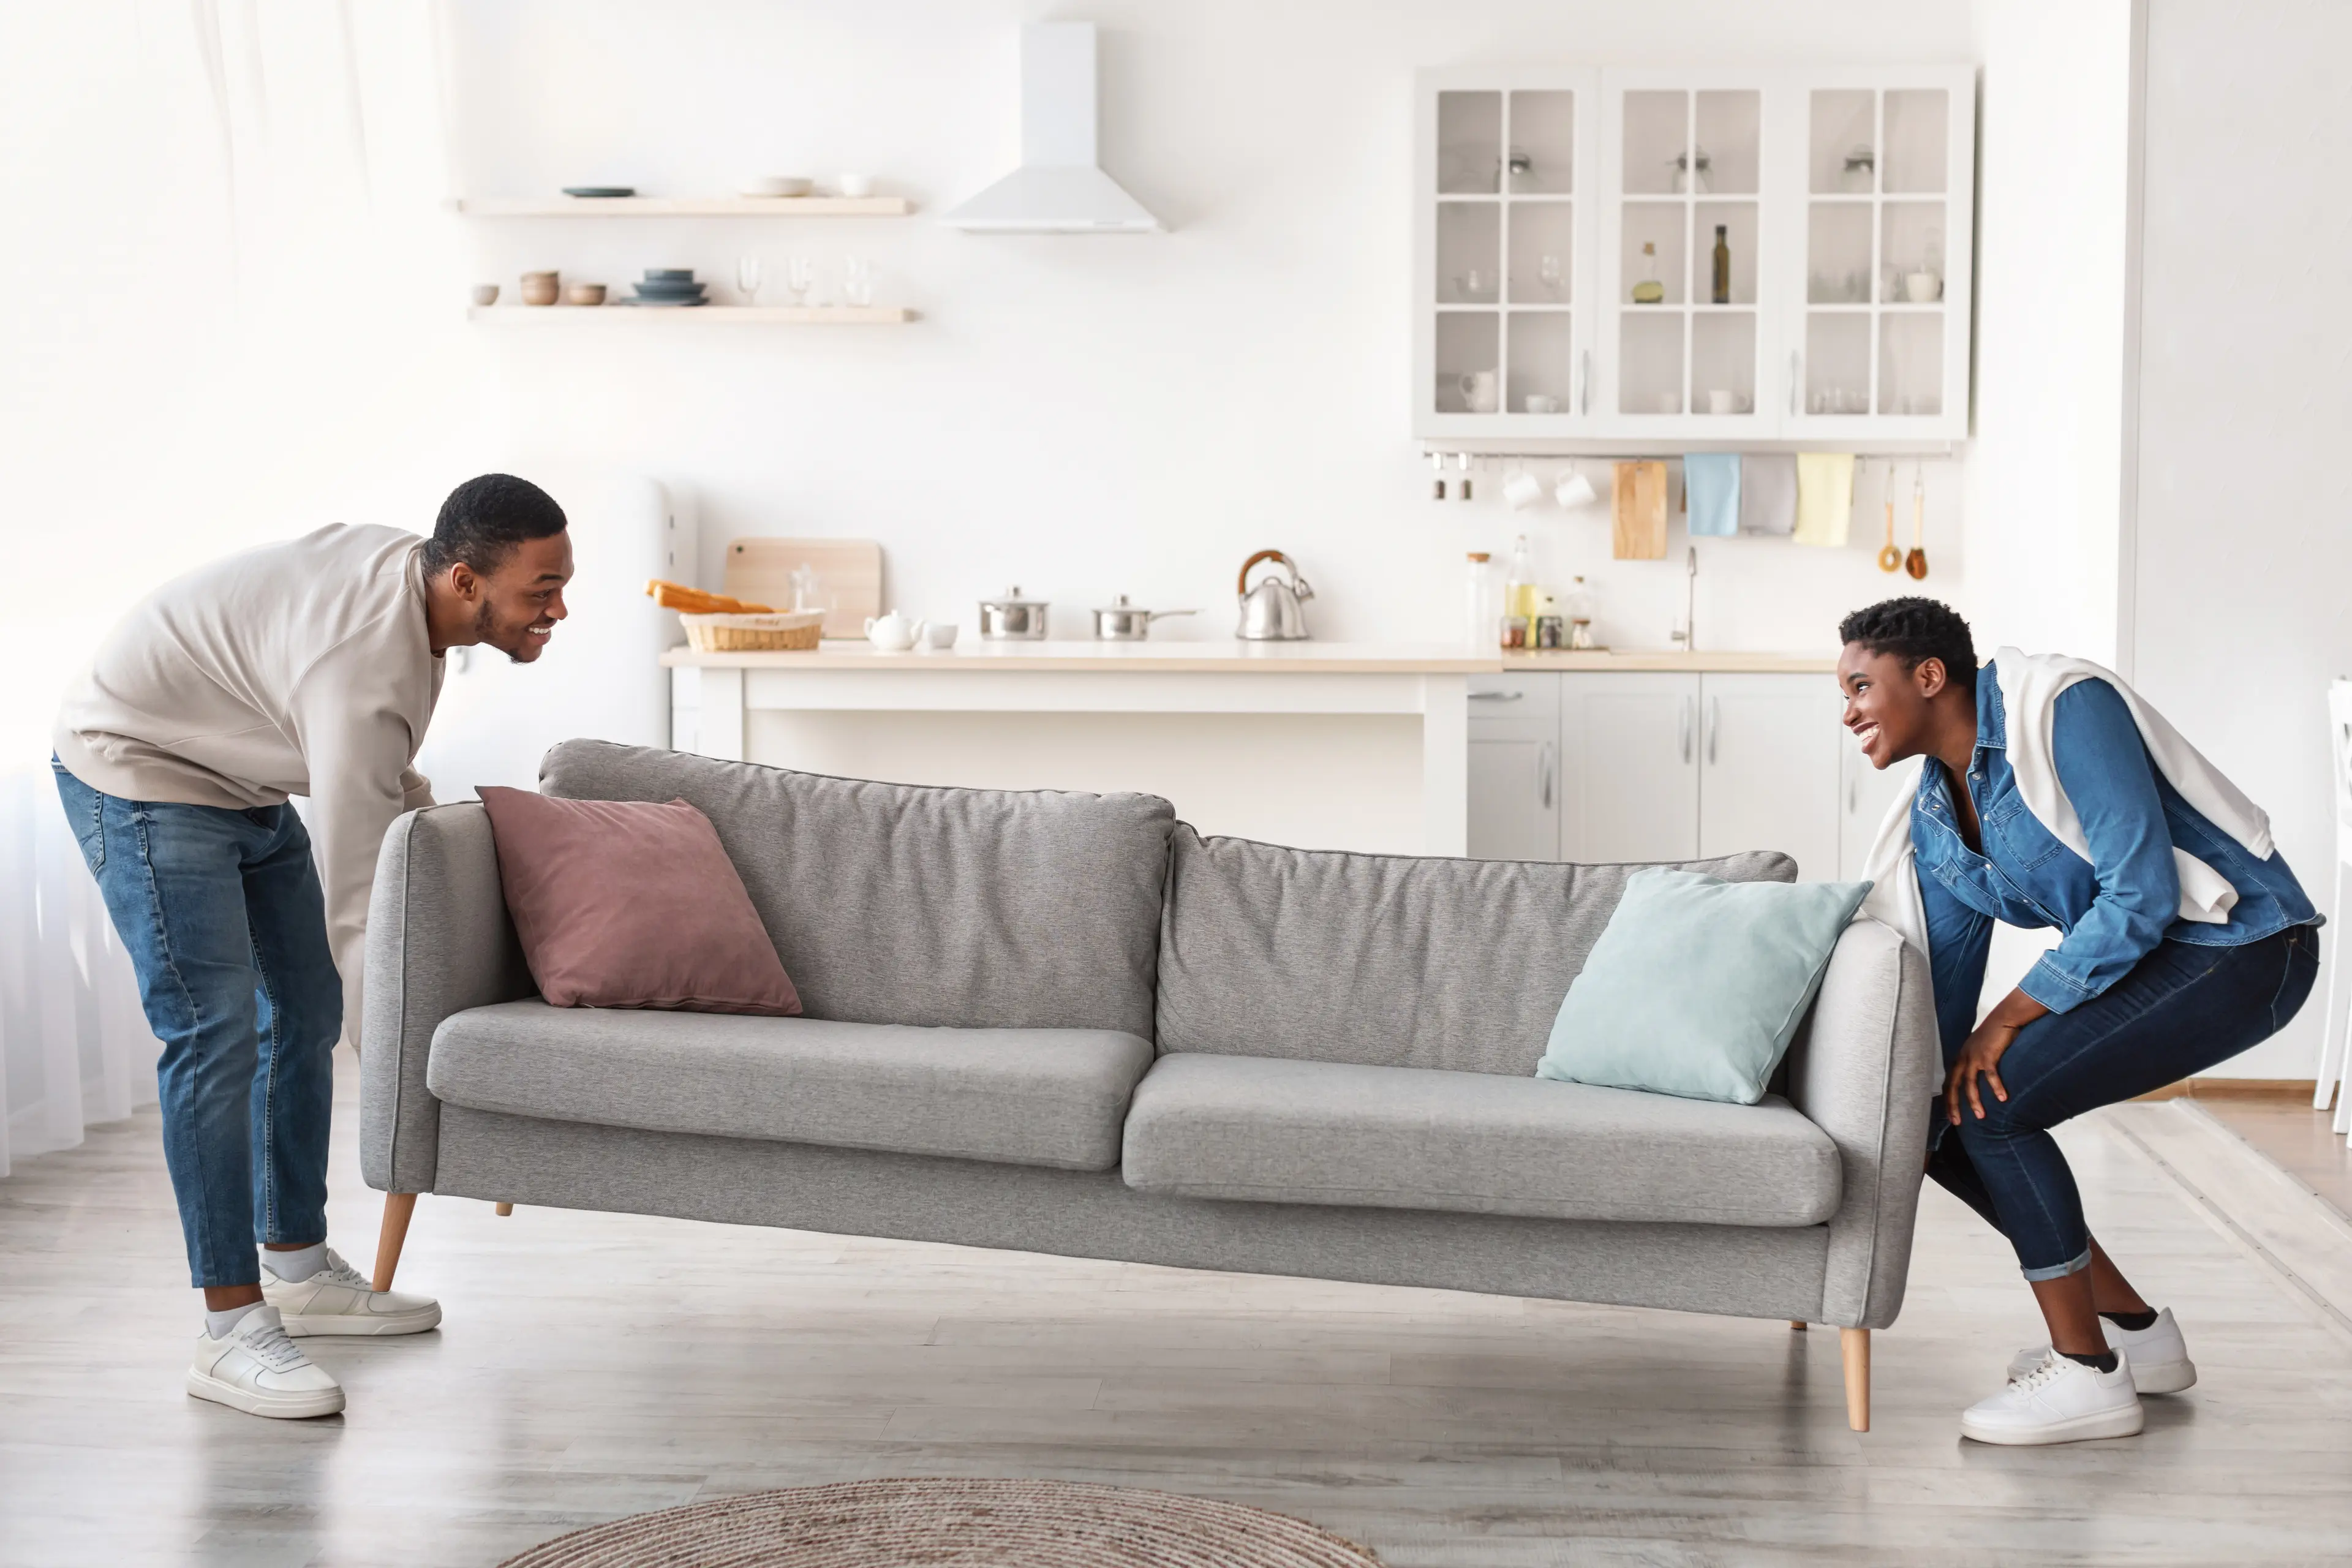 A smiling couple moves a sofa into a spacious, bright room. They look excited as they set up their new home, capturing the joy of starting fresh and creating a comfortable living space together. This shows how Acima Leasing can help customers get the items they need.